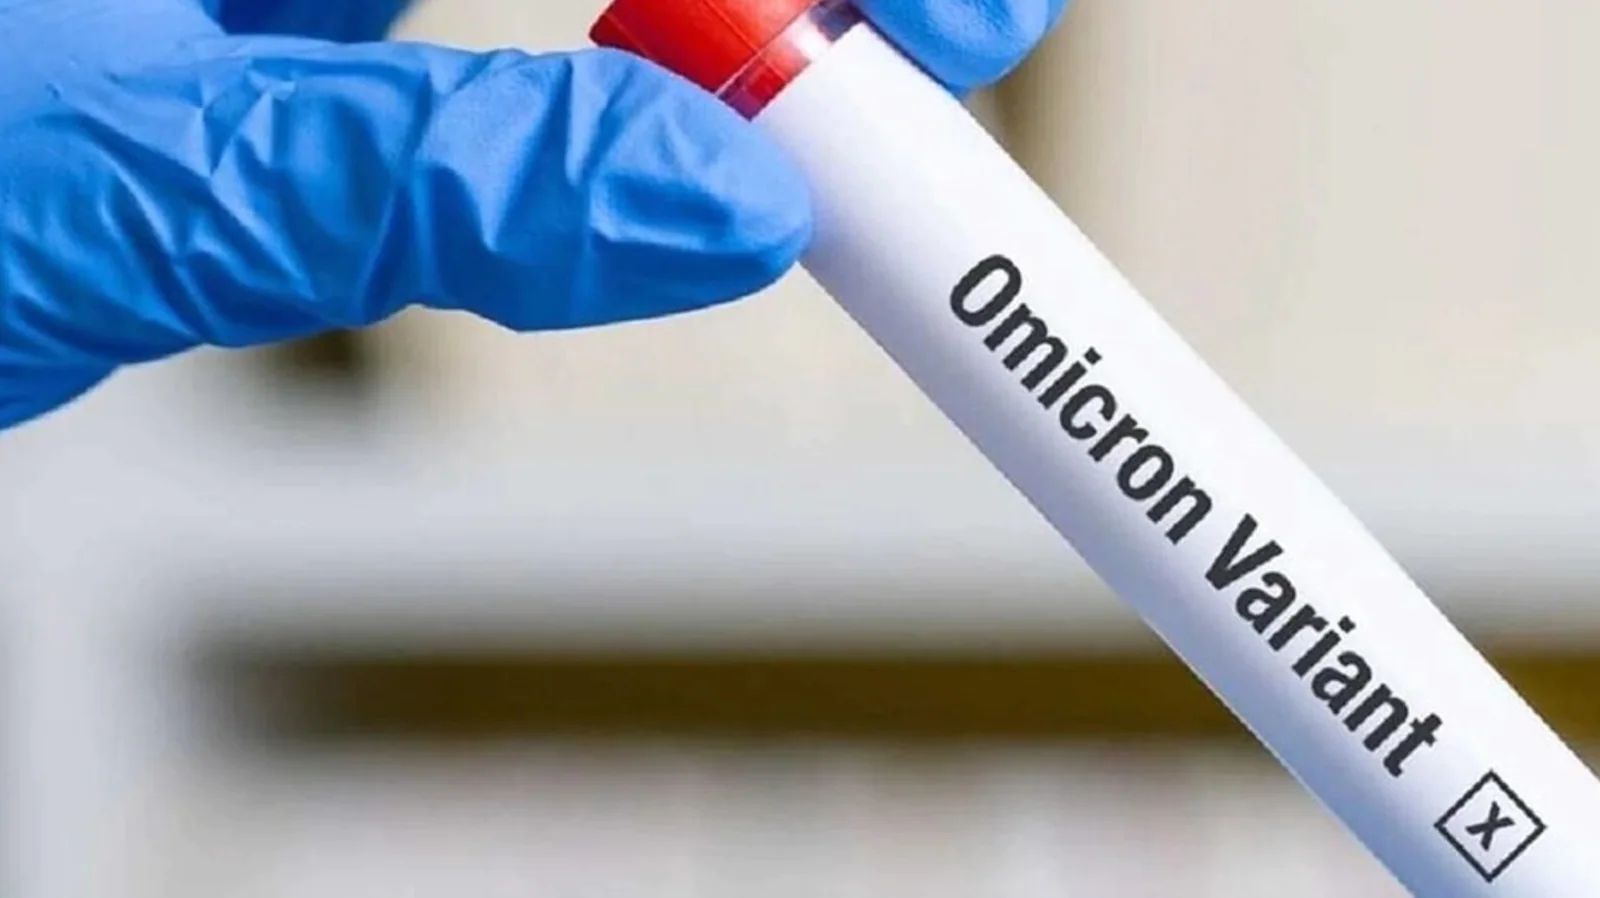 Stealth omicron: Know the common symptoms from experts